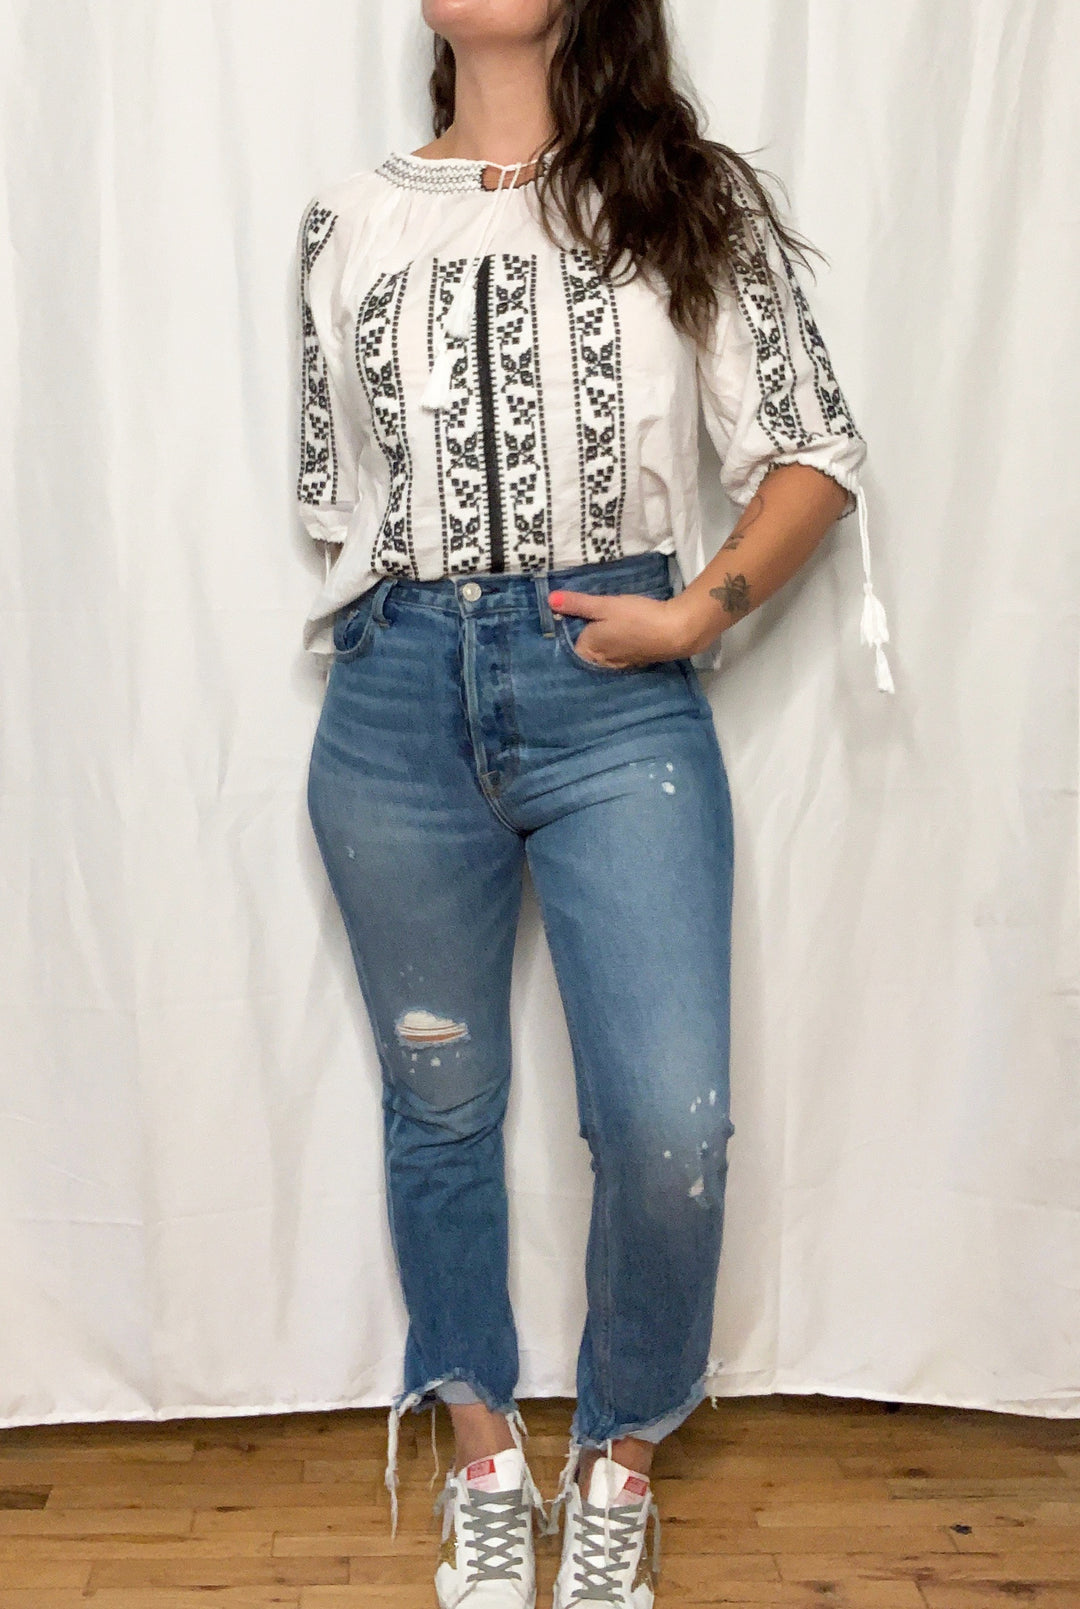 BLACK/WHITE PEASANT TOP - Kingfisher Road - Online Boutique